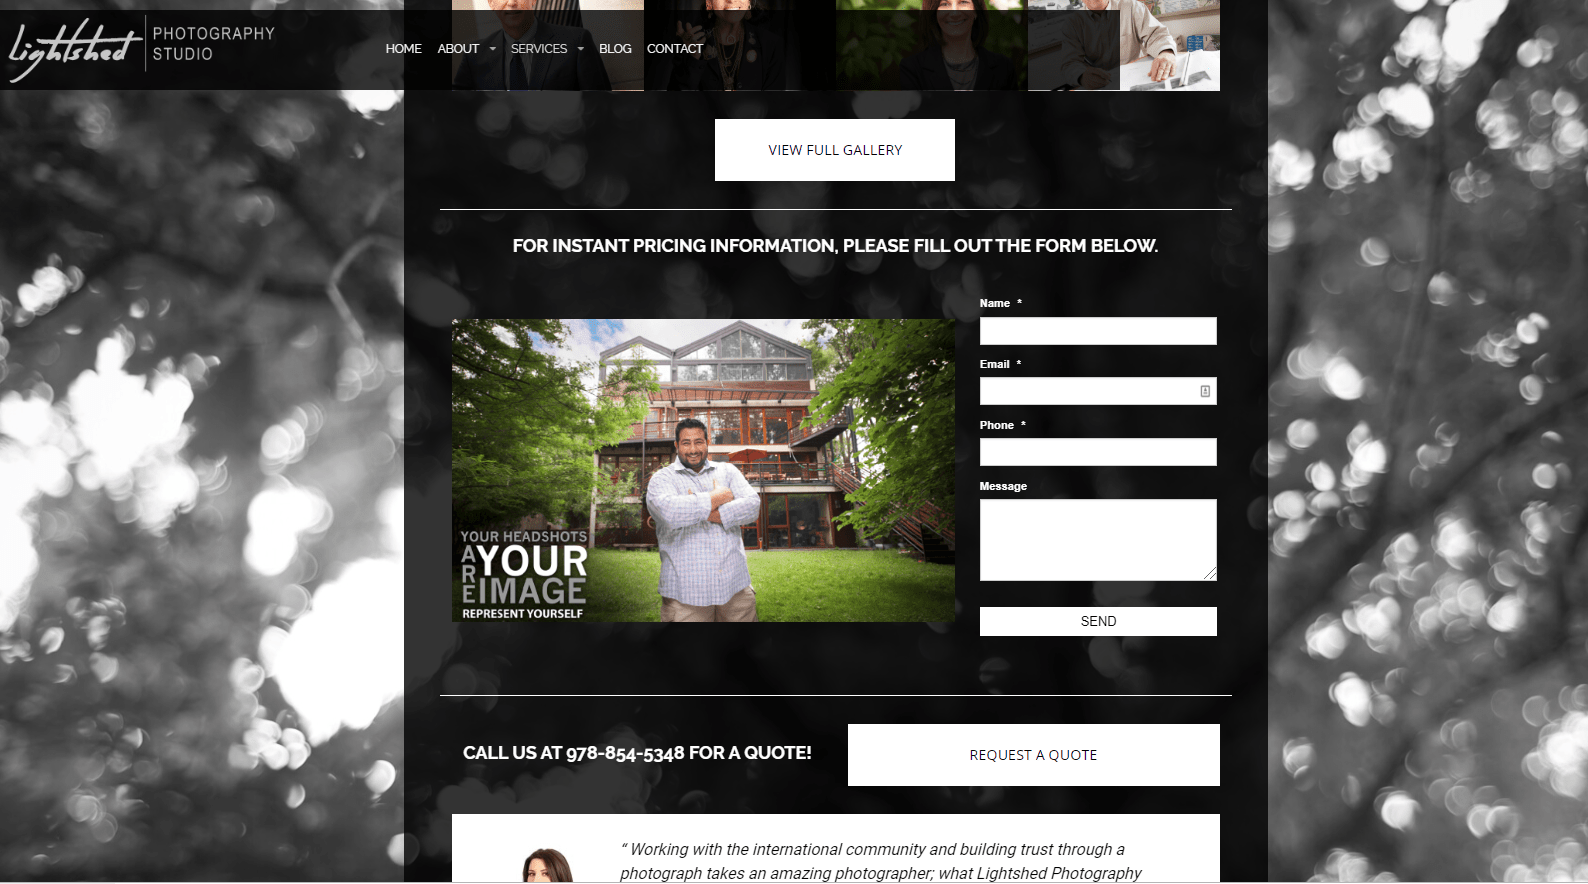 custom landing pages in our website design project for Lightshed Photography